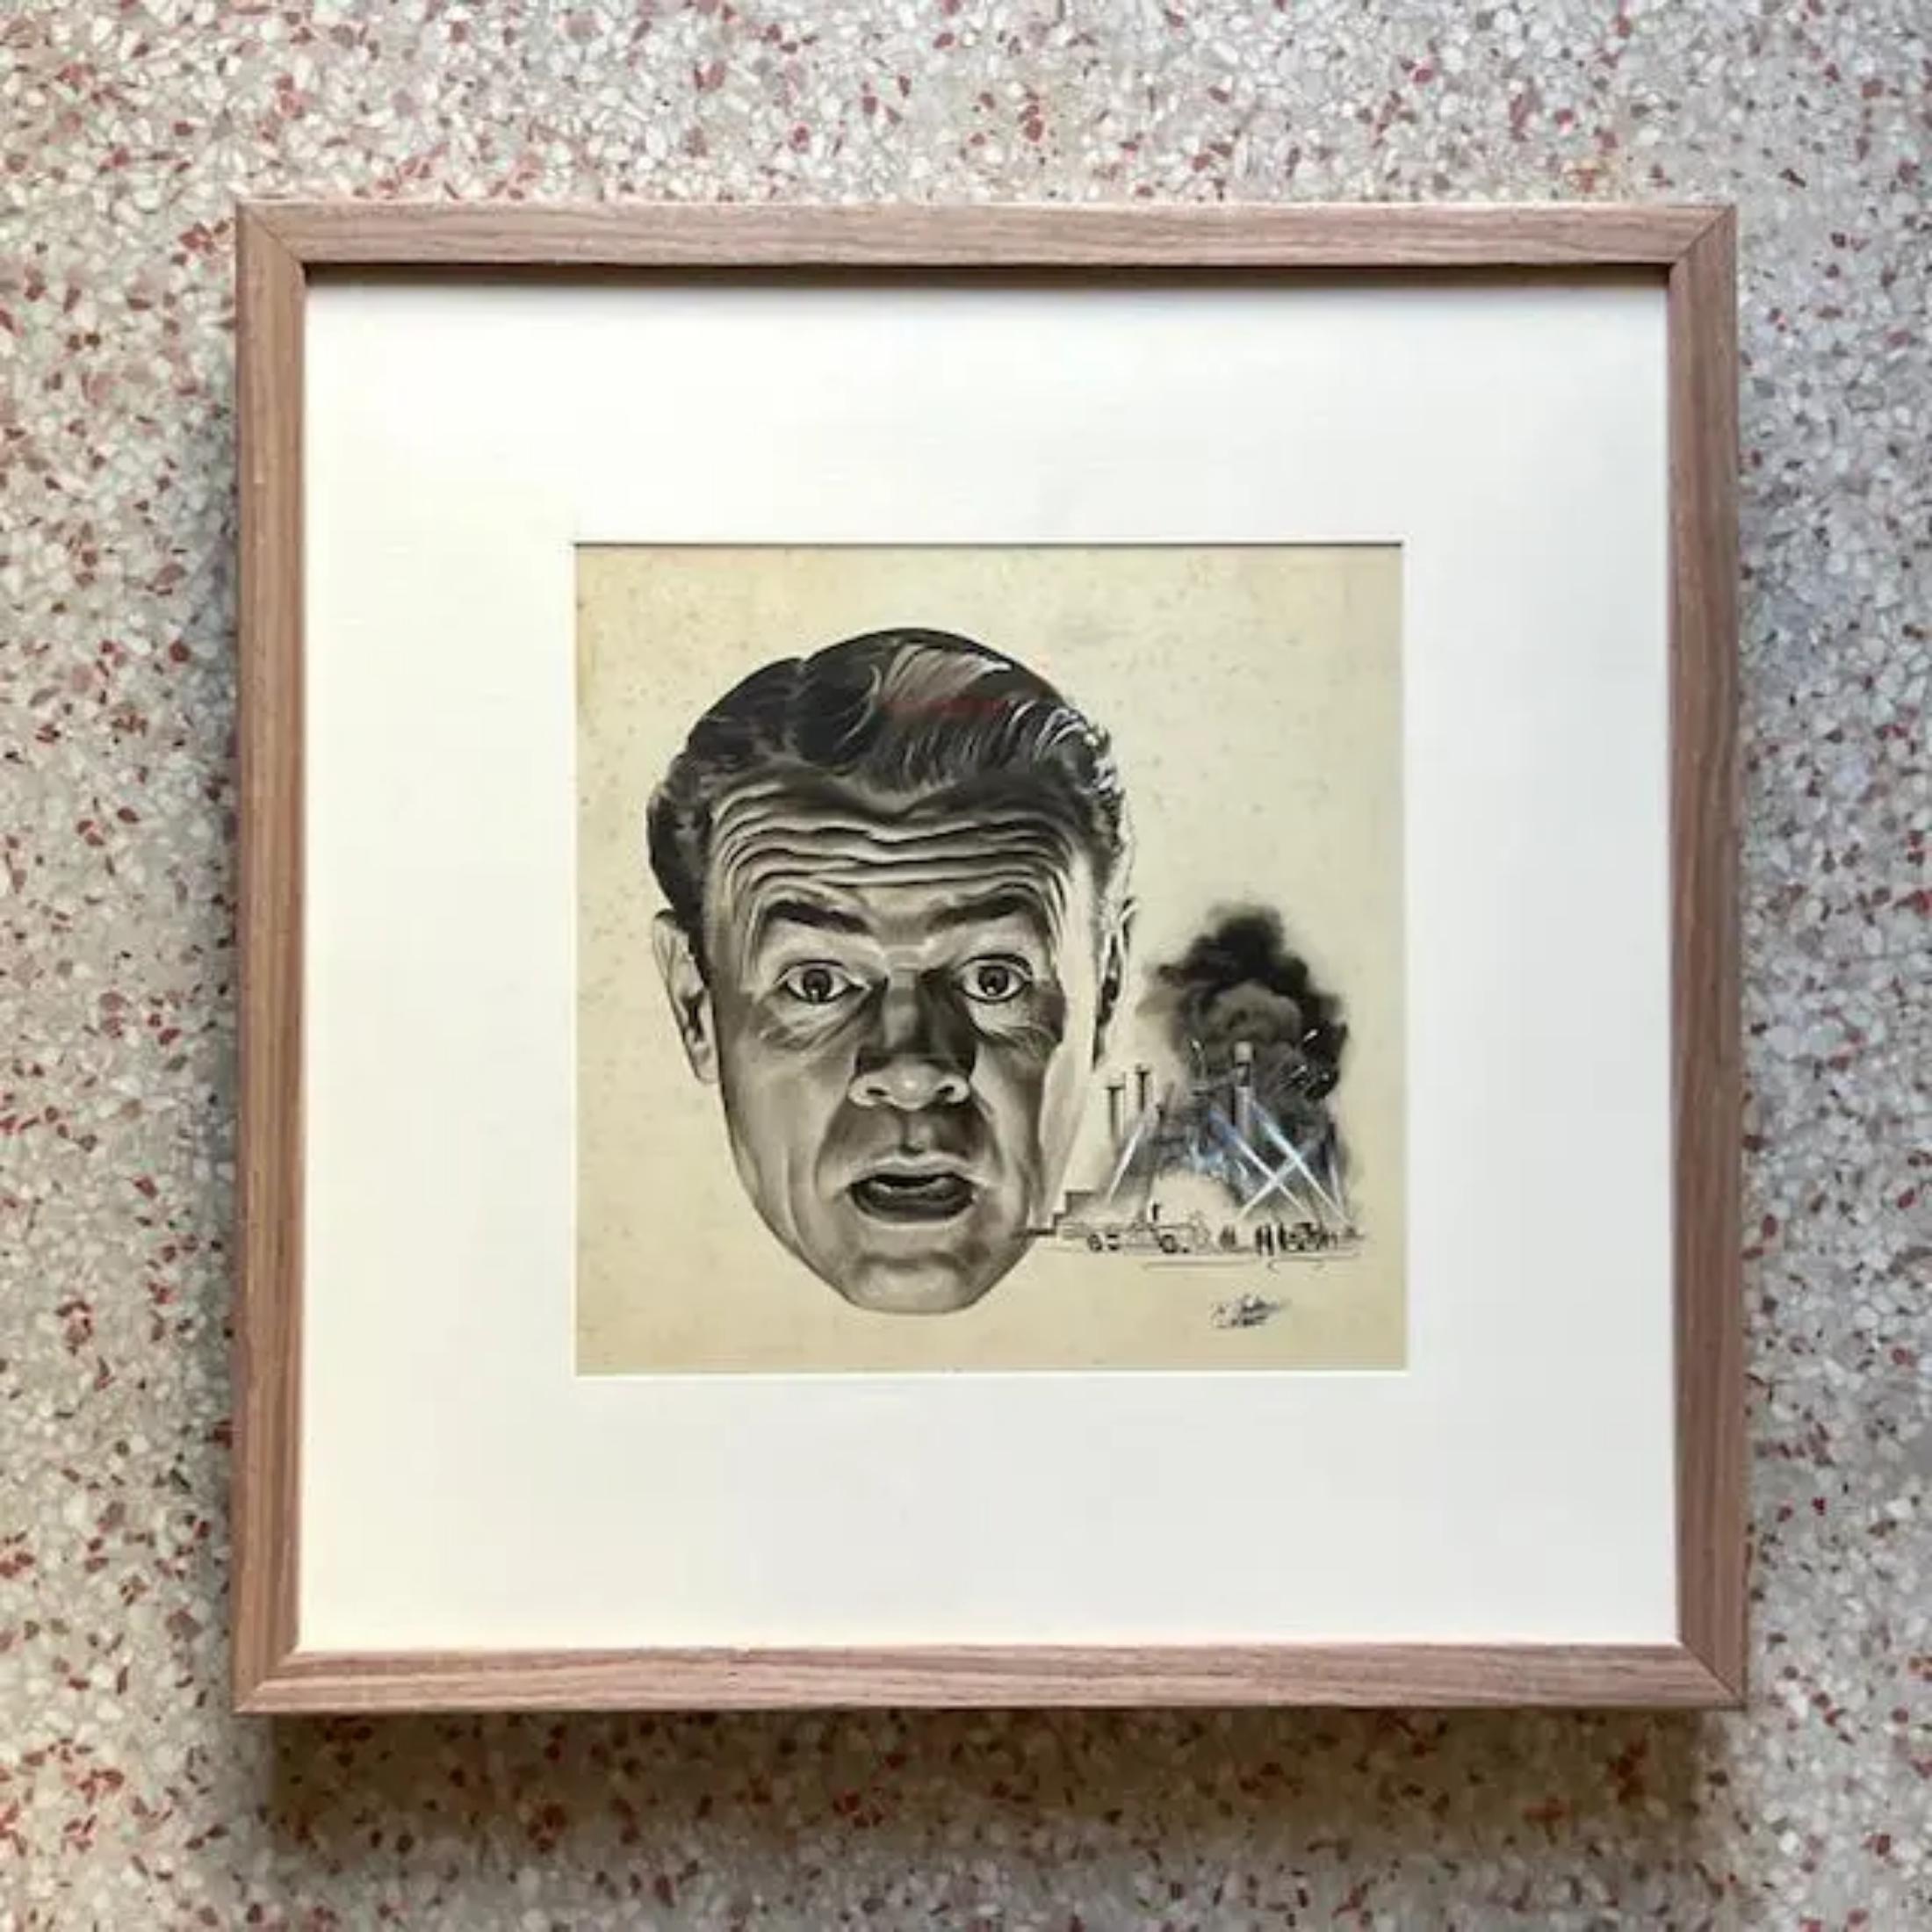 A fantastic vintage original ink sketch on paper. A cool sci-fi drawing of a man’s face. Little story line vignettes around the man’s head. Almost like movie stills. Signed by the artist. Acquired from a Palm Beach estate